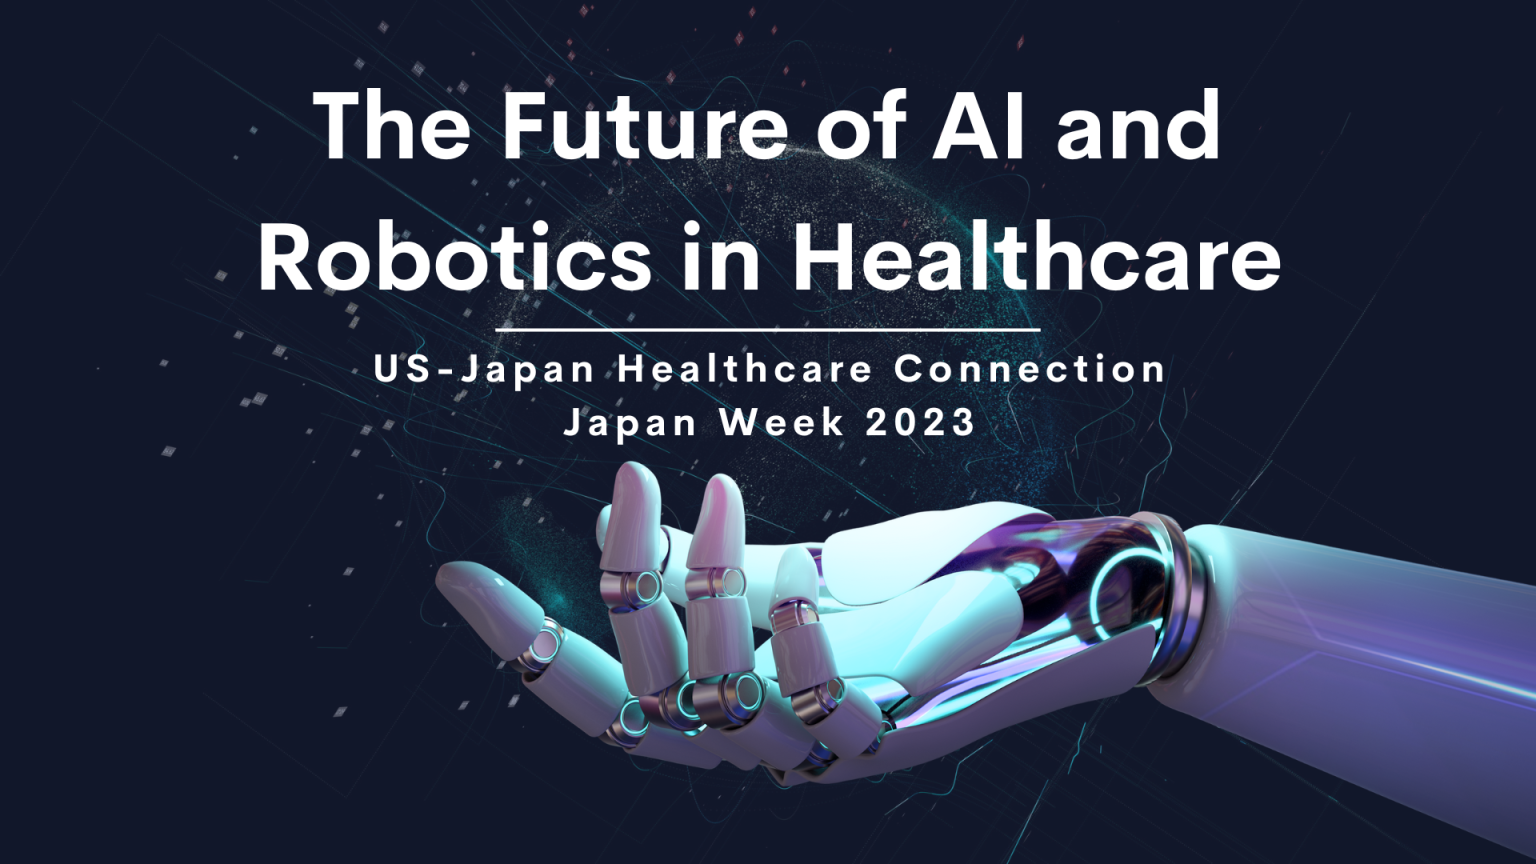 2023 U.S.-Japan Healthcare Connection: The Future of AI and Robotics in Healthcare - 人とロボットの共進化を促すAIとは -